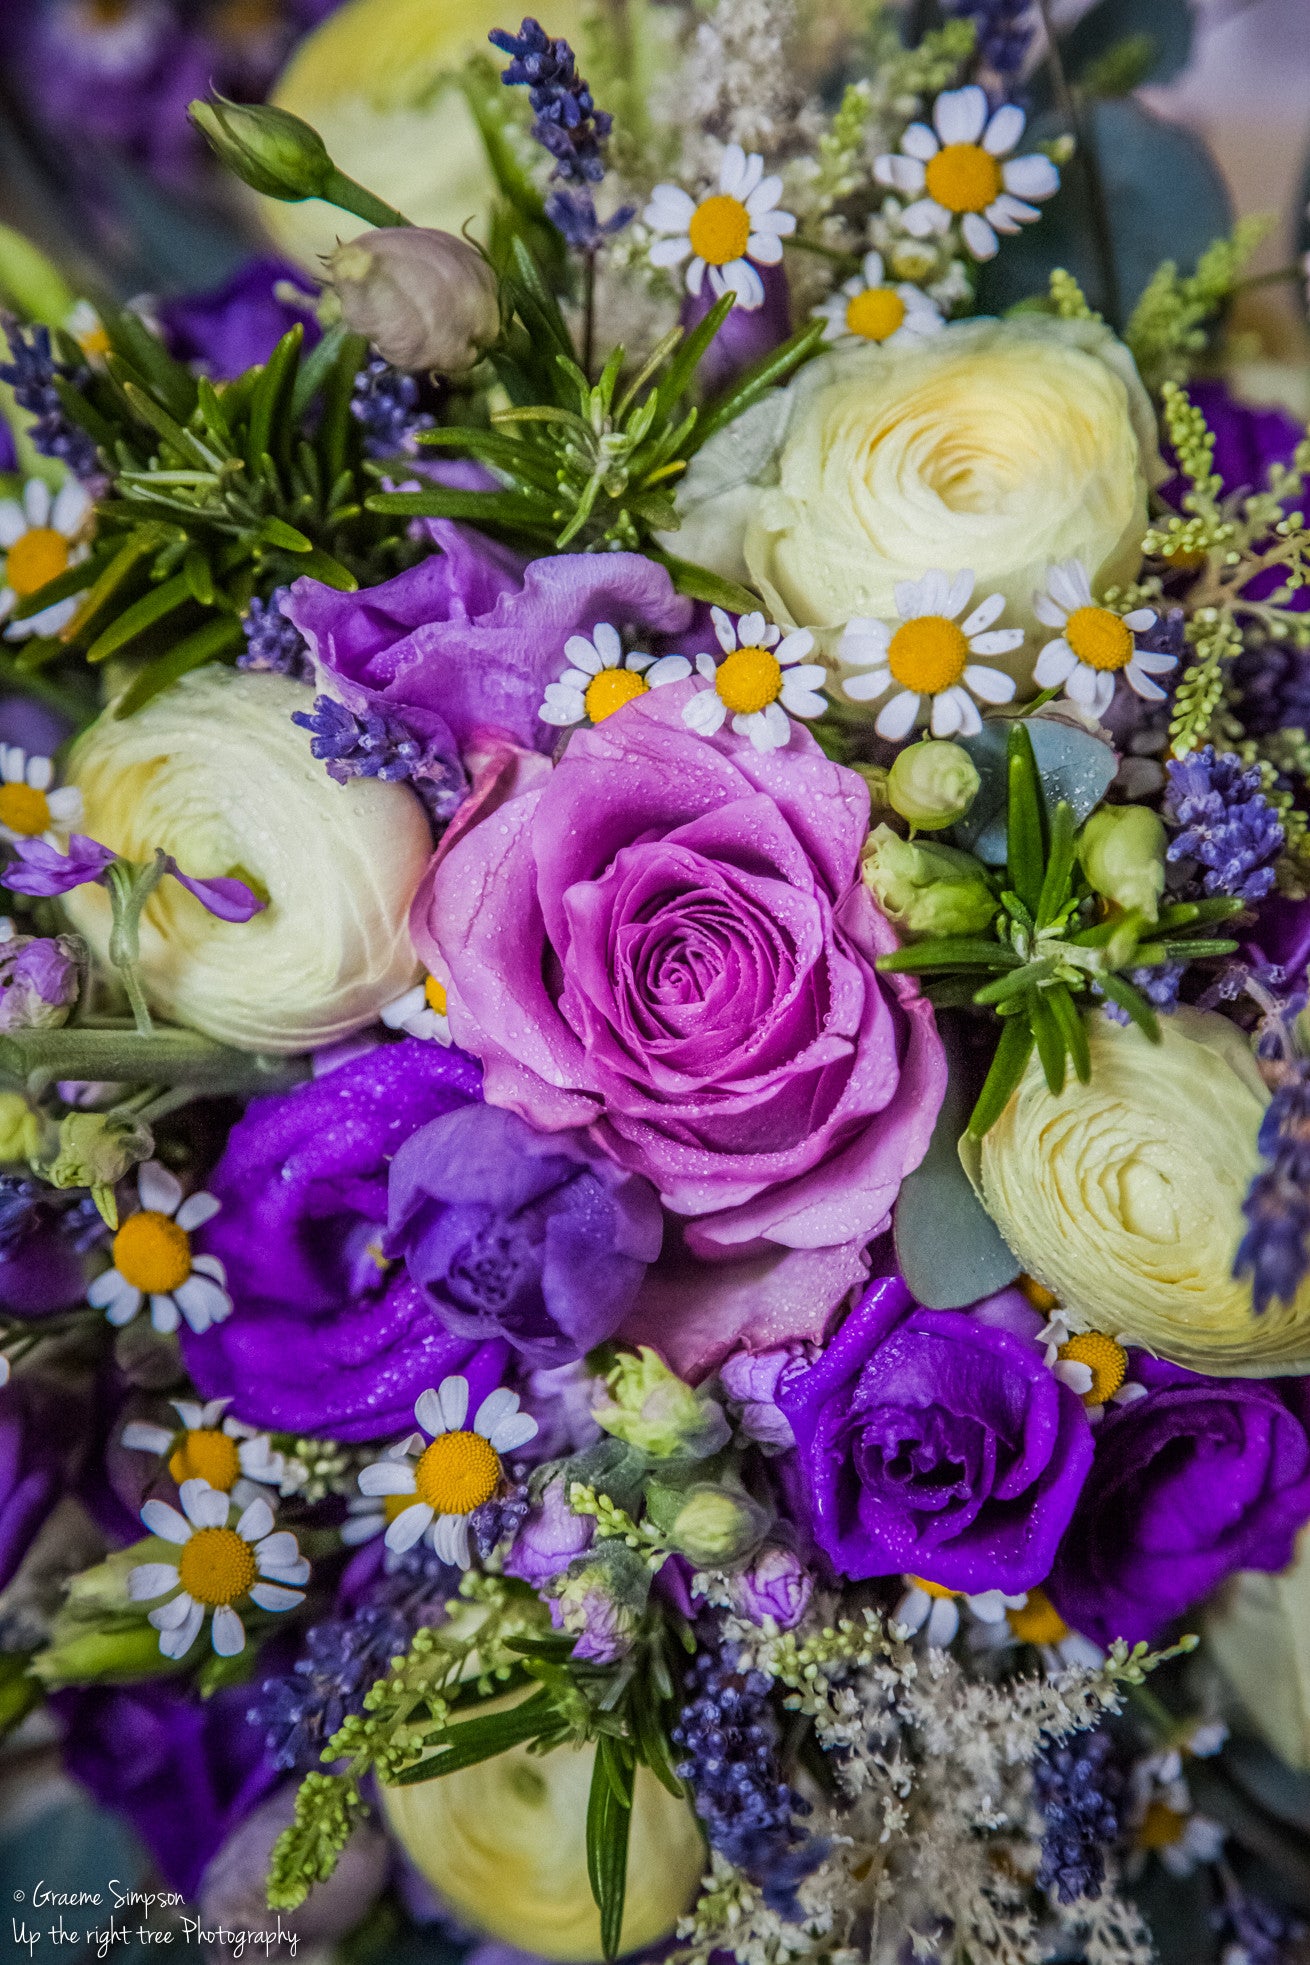 Close up of the purple and cream flowers used in the Bride's wedding bouquet.